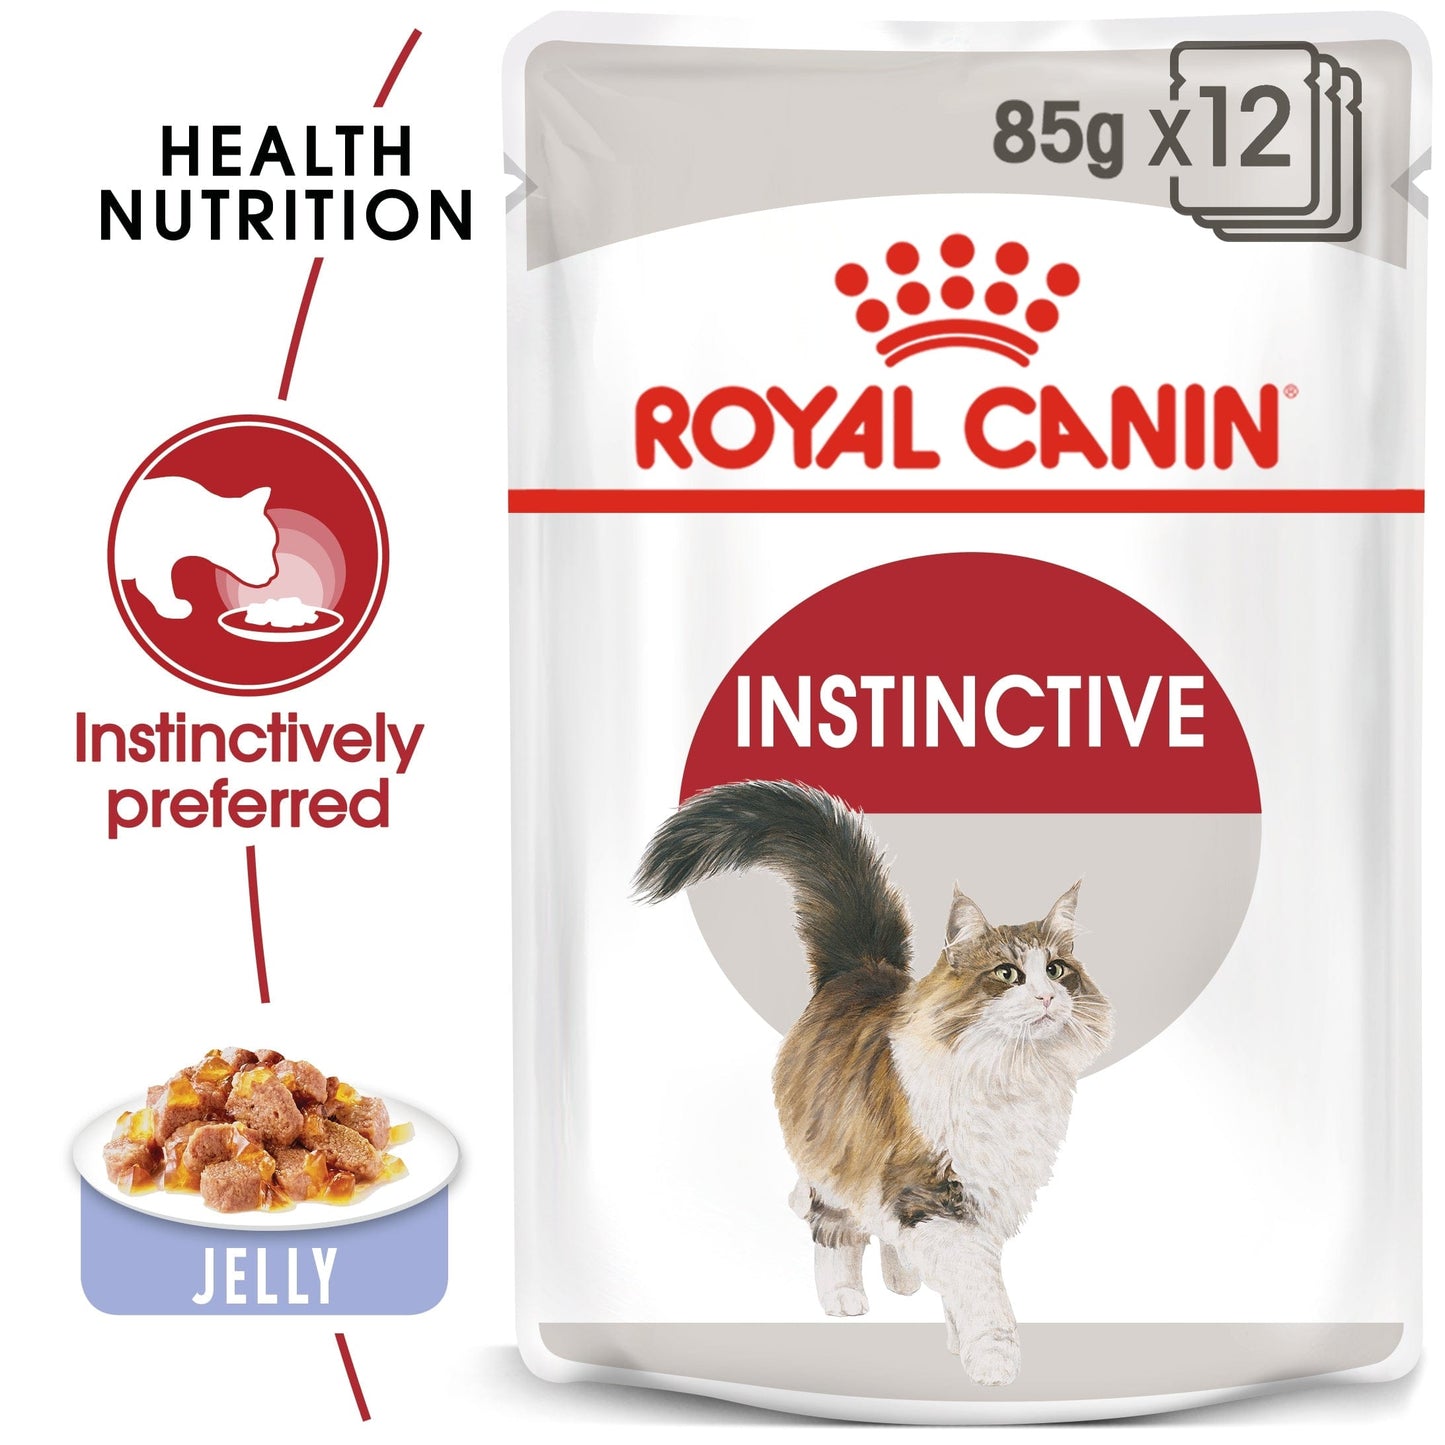 Royal Canin Feline Health Nutrition Instinctive Adult Cats Jelly Wet Food Pouch, 85g